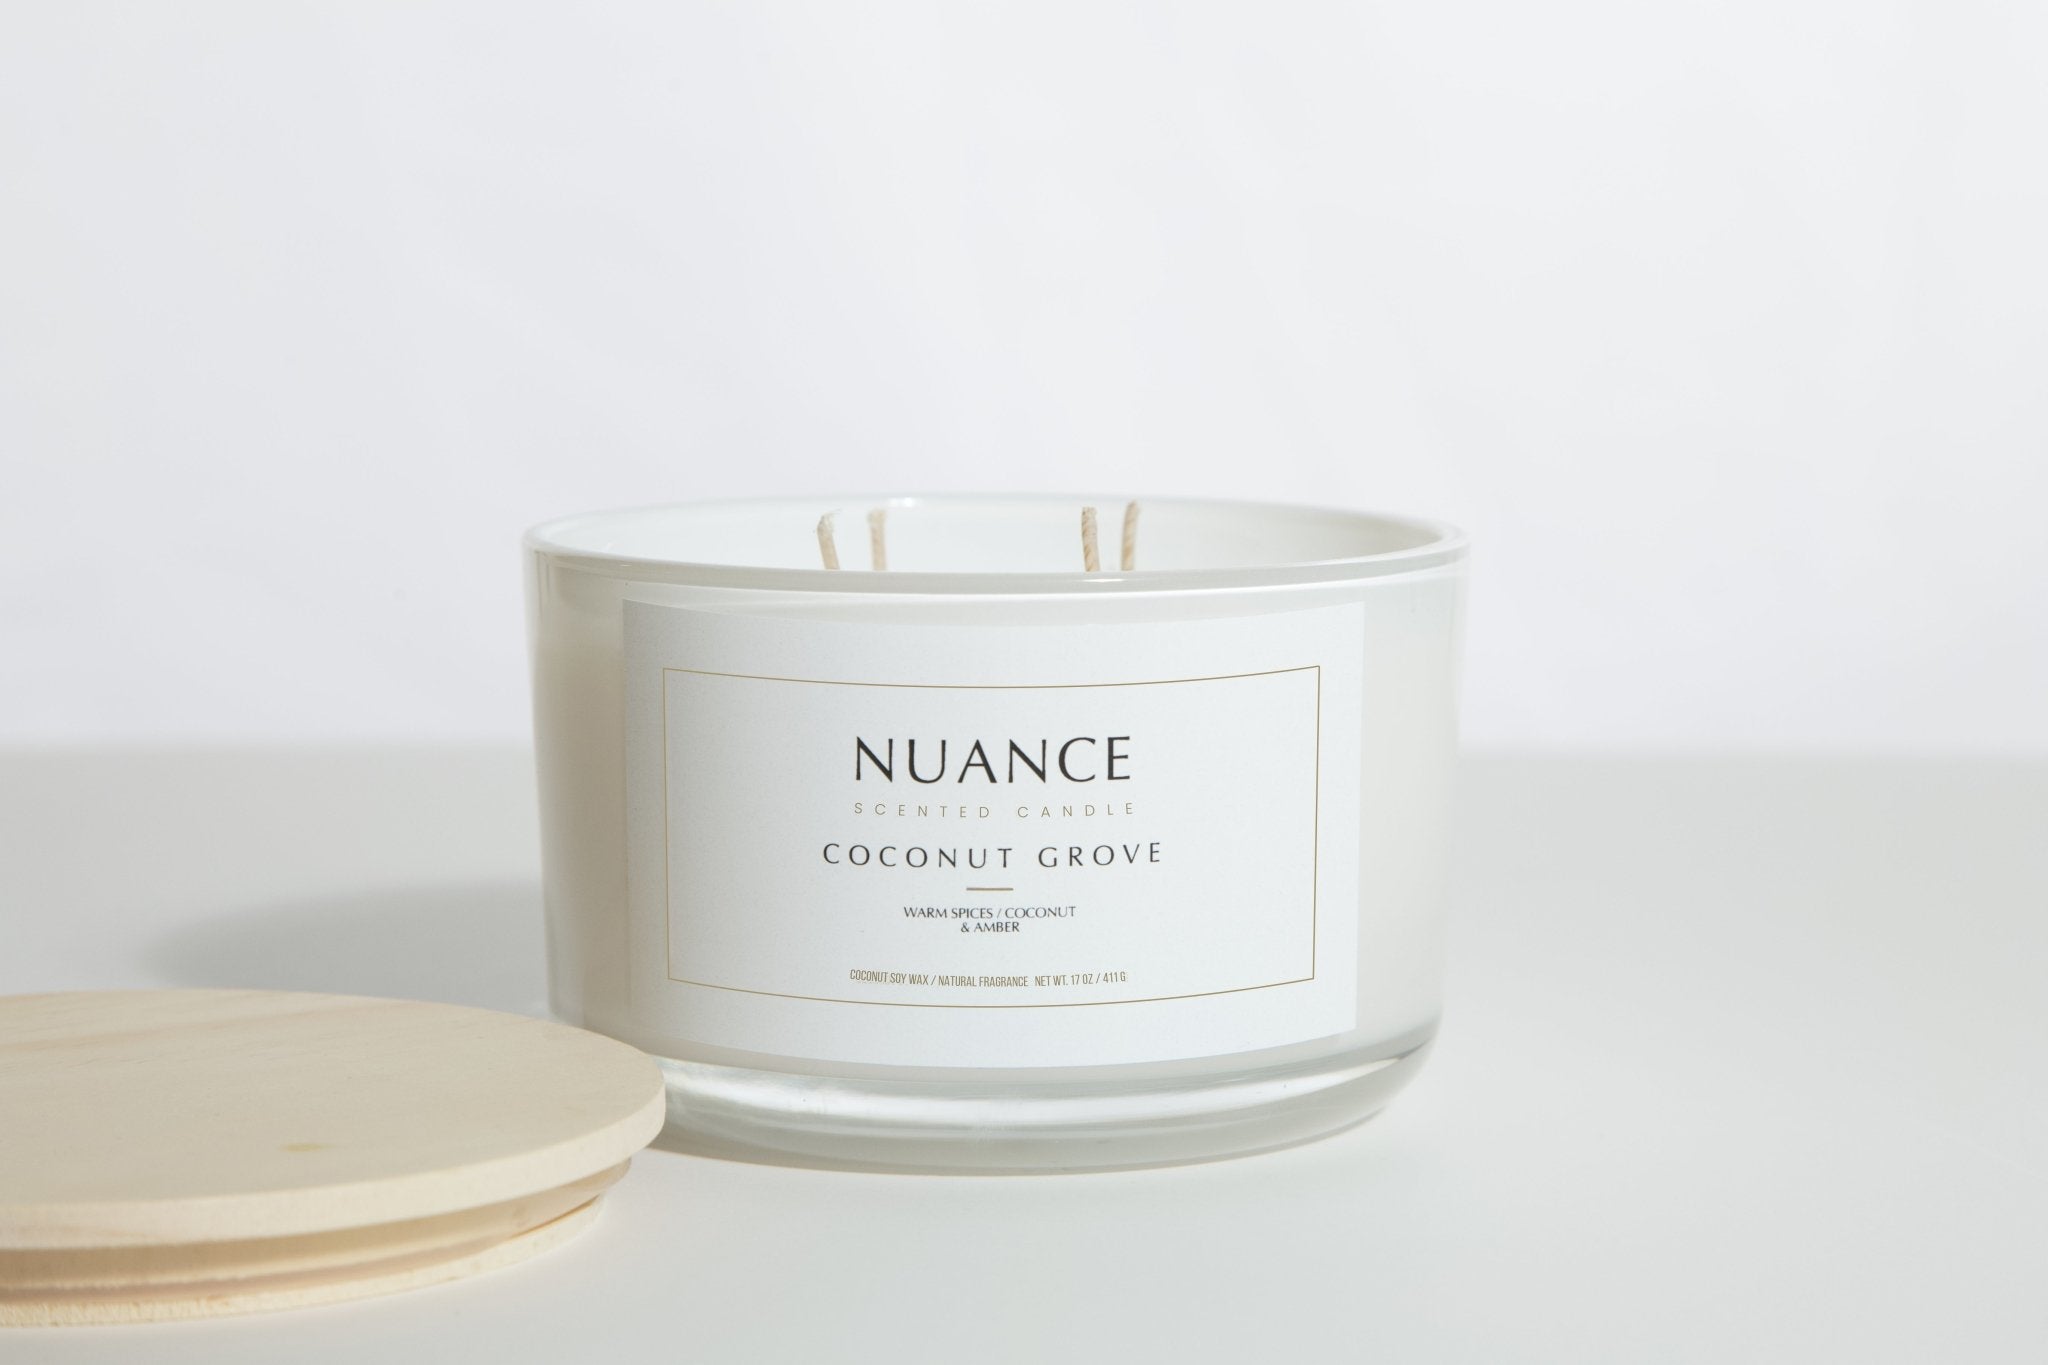 Downers Grove Days Coconut Soy Candle